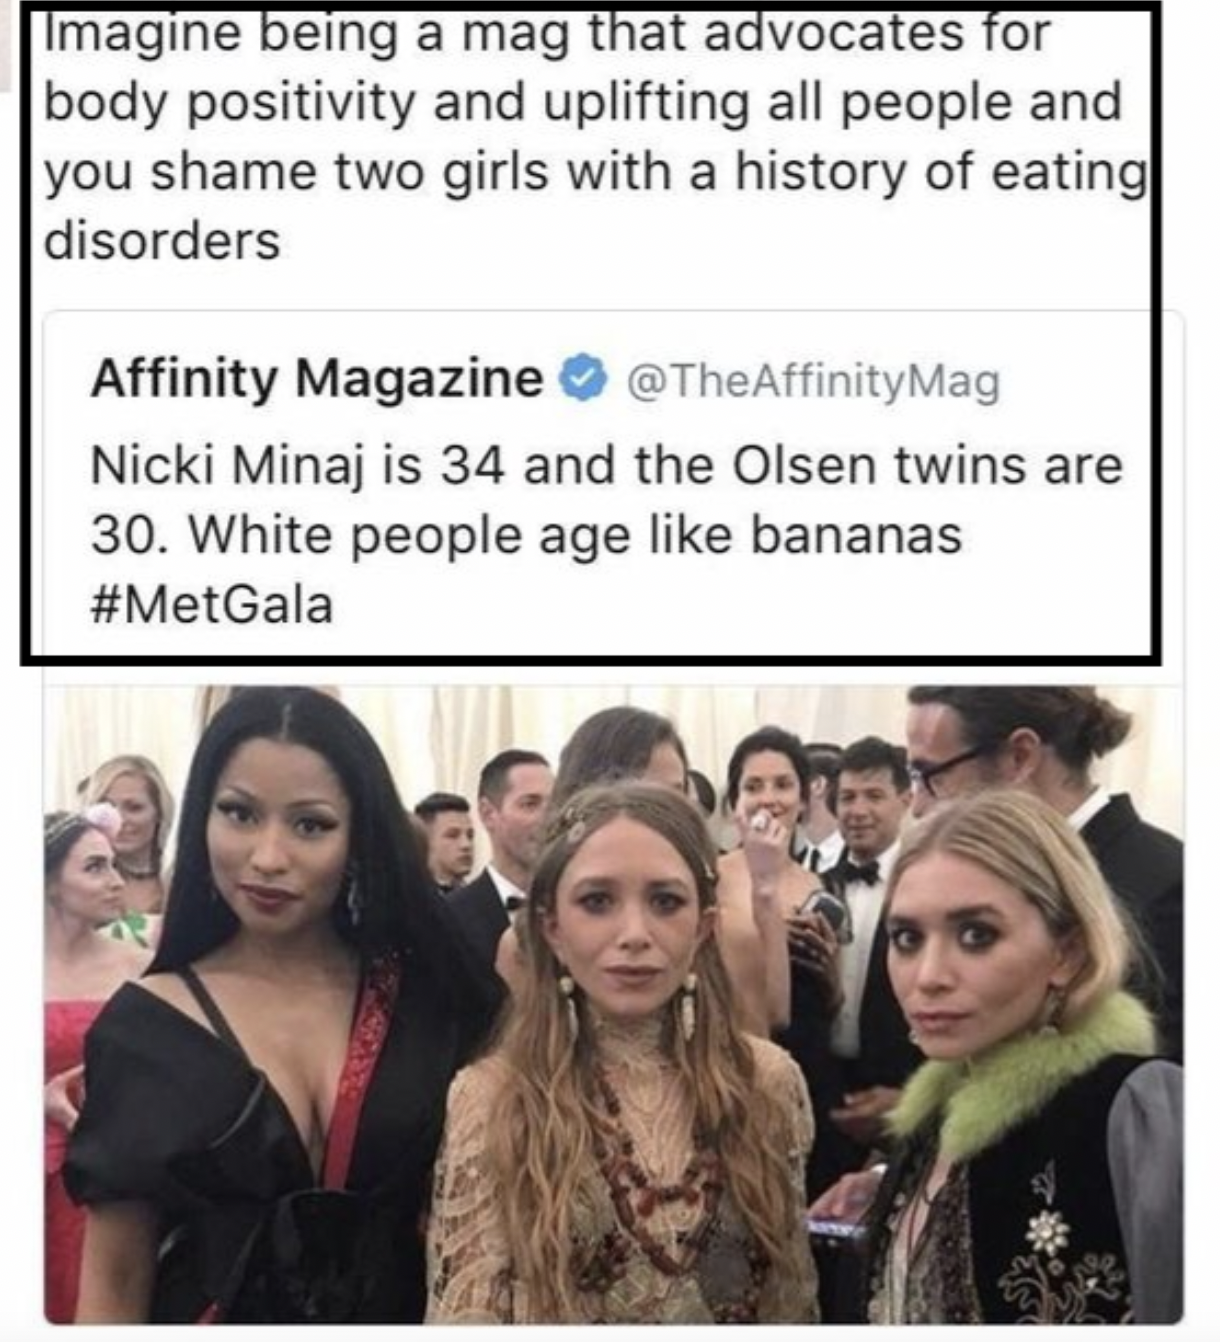 nicki minaj olsen twins - Imagine being a mag that advocates for body positivity and uplifting all people and you shame two girls with a history of eating disorders Affinity Magazine Nicki Minaj is 34 and the Olsen twins are 30. White people age bananas